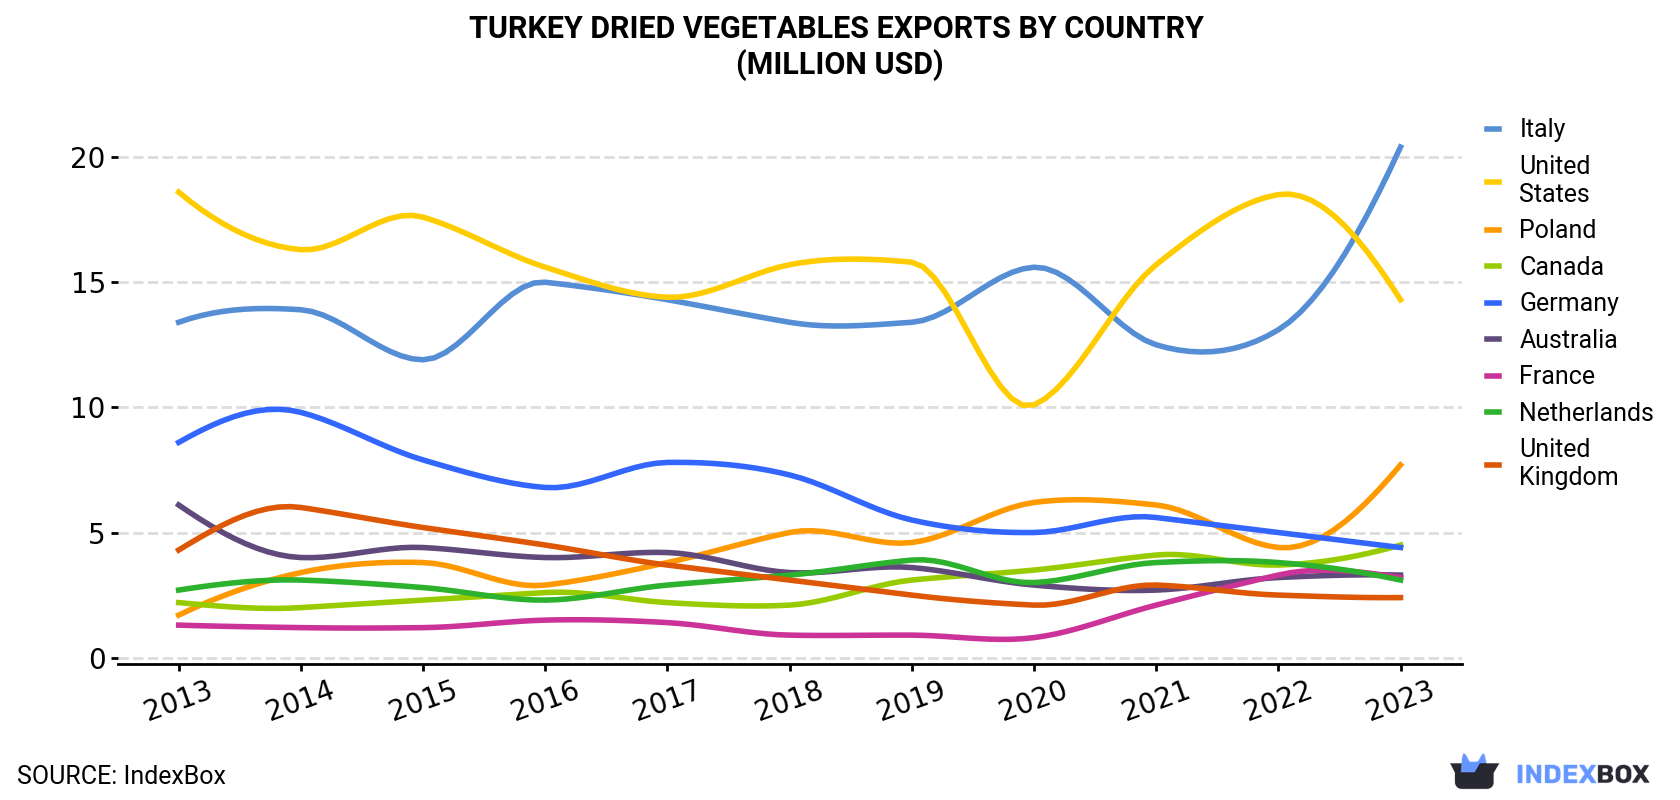 Turkey Dried Vegetables Exports By Country (Million USD)